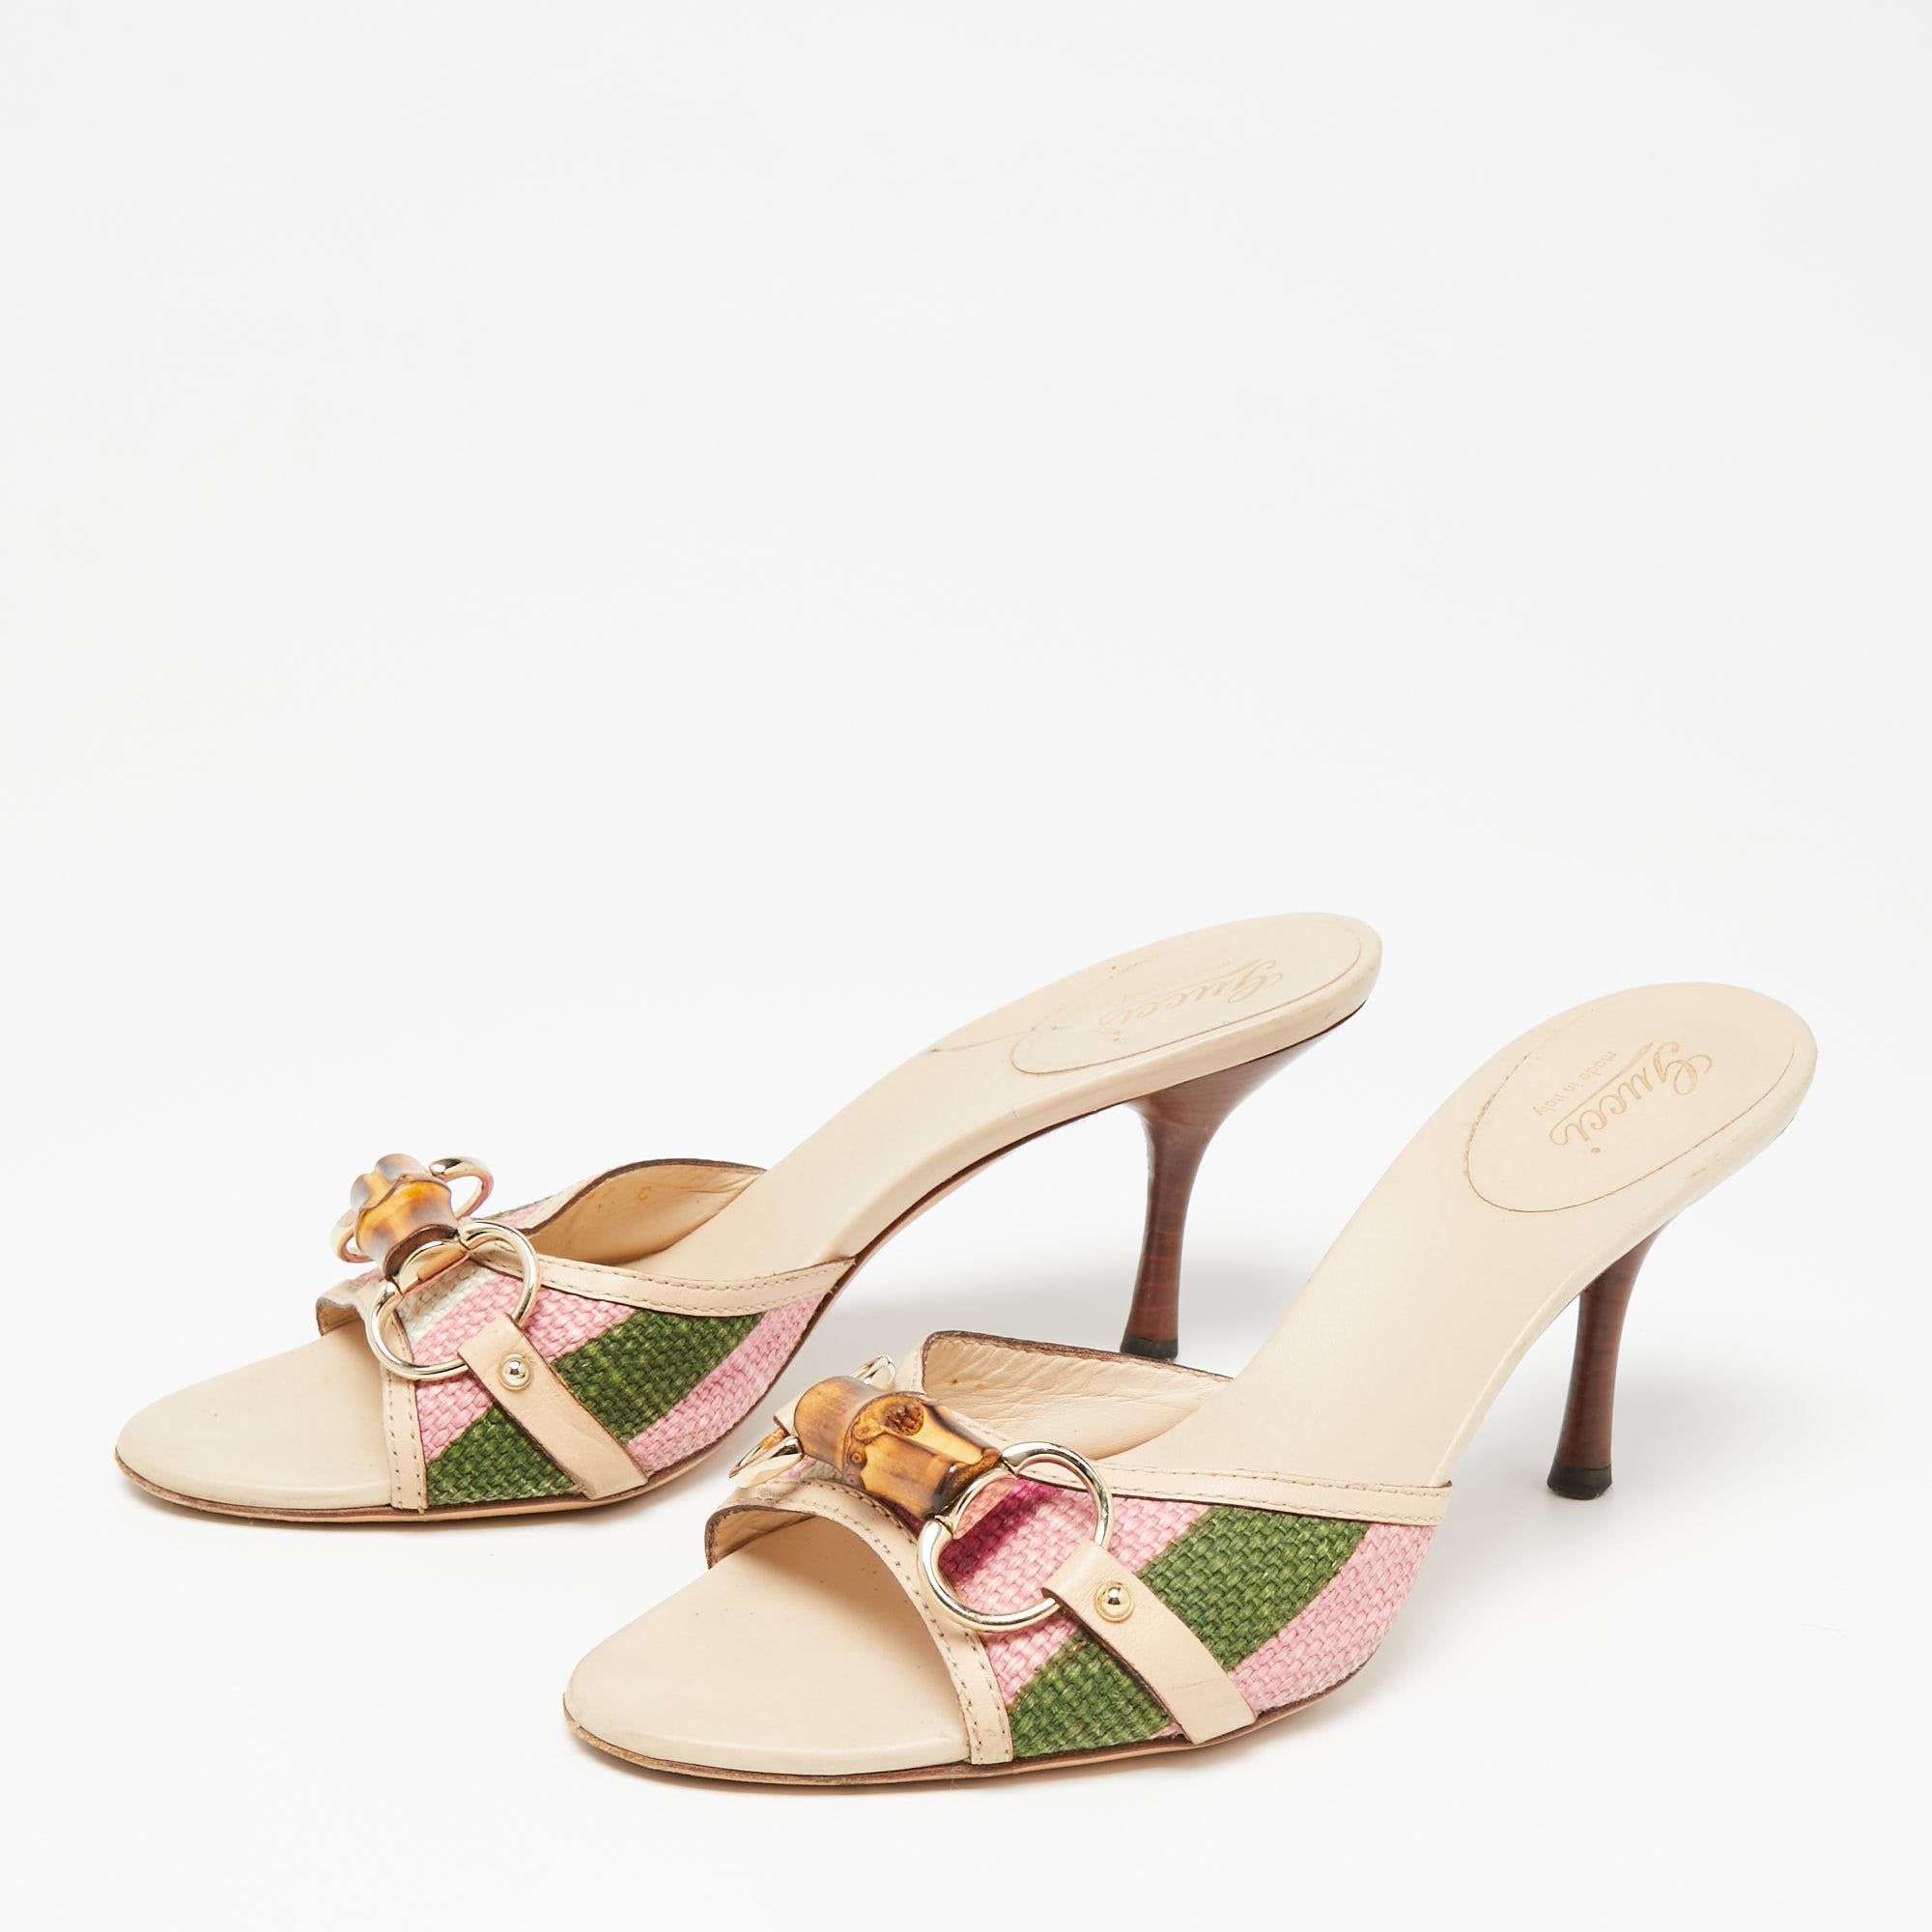 These chic sandals from Gucci can give your entire ensemble a makeover. Crafted in Italy, they are made from striped canvas & leather and come in lovely multicolored hues. They are styled with open toes, bamboo Horsebit detailing on the uppers, 8 cm